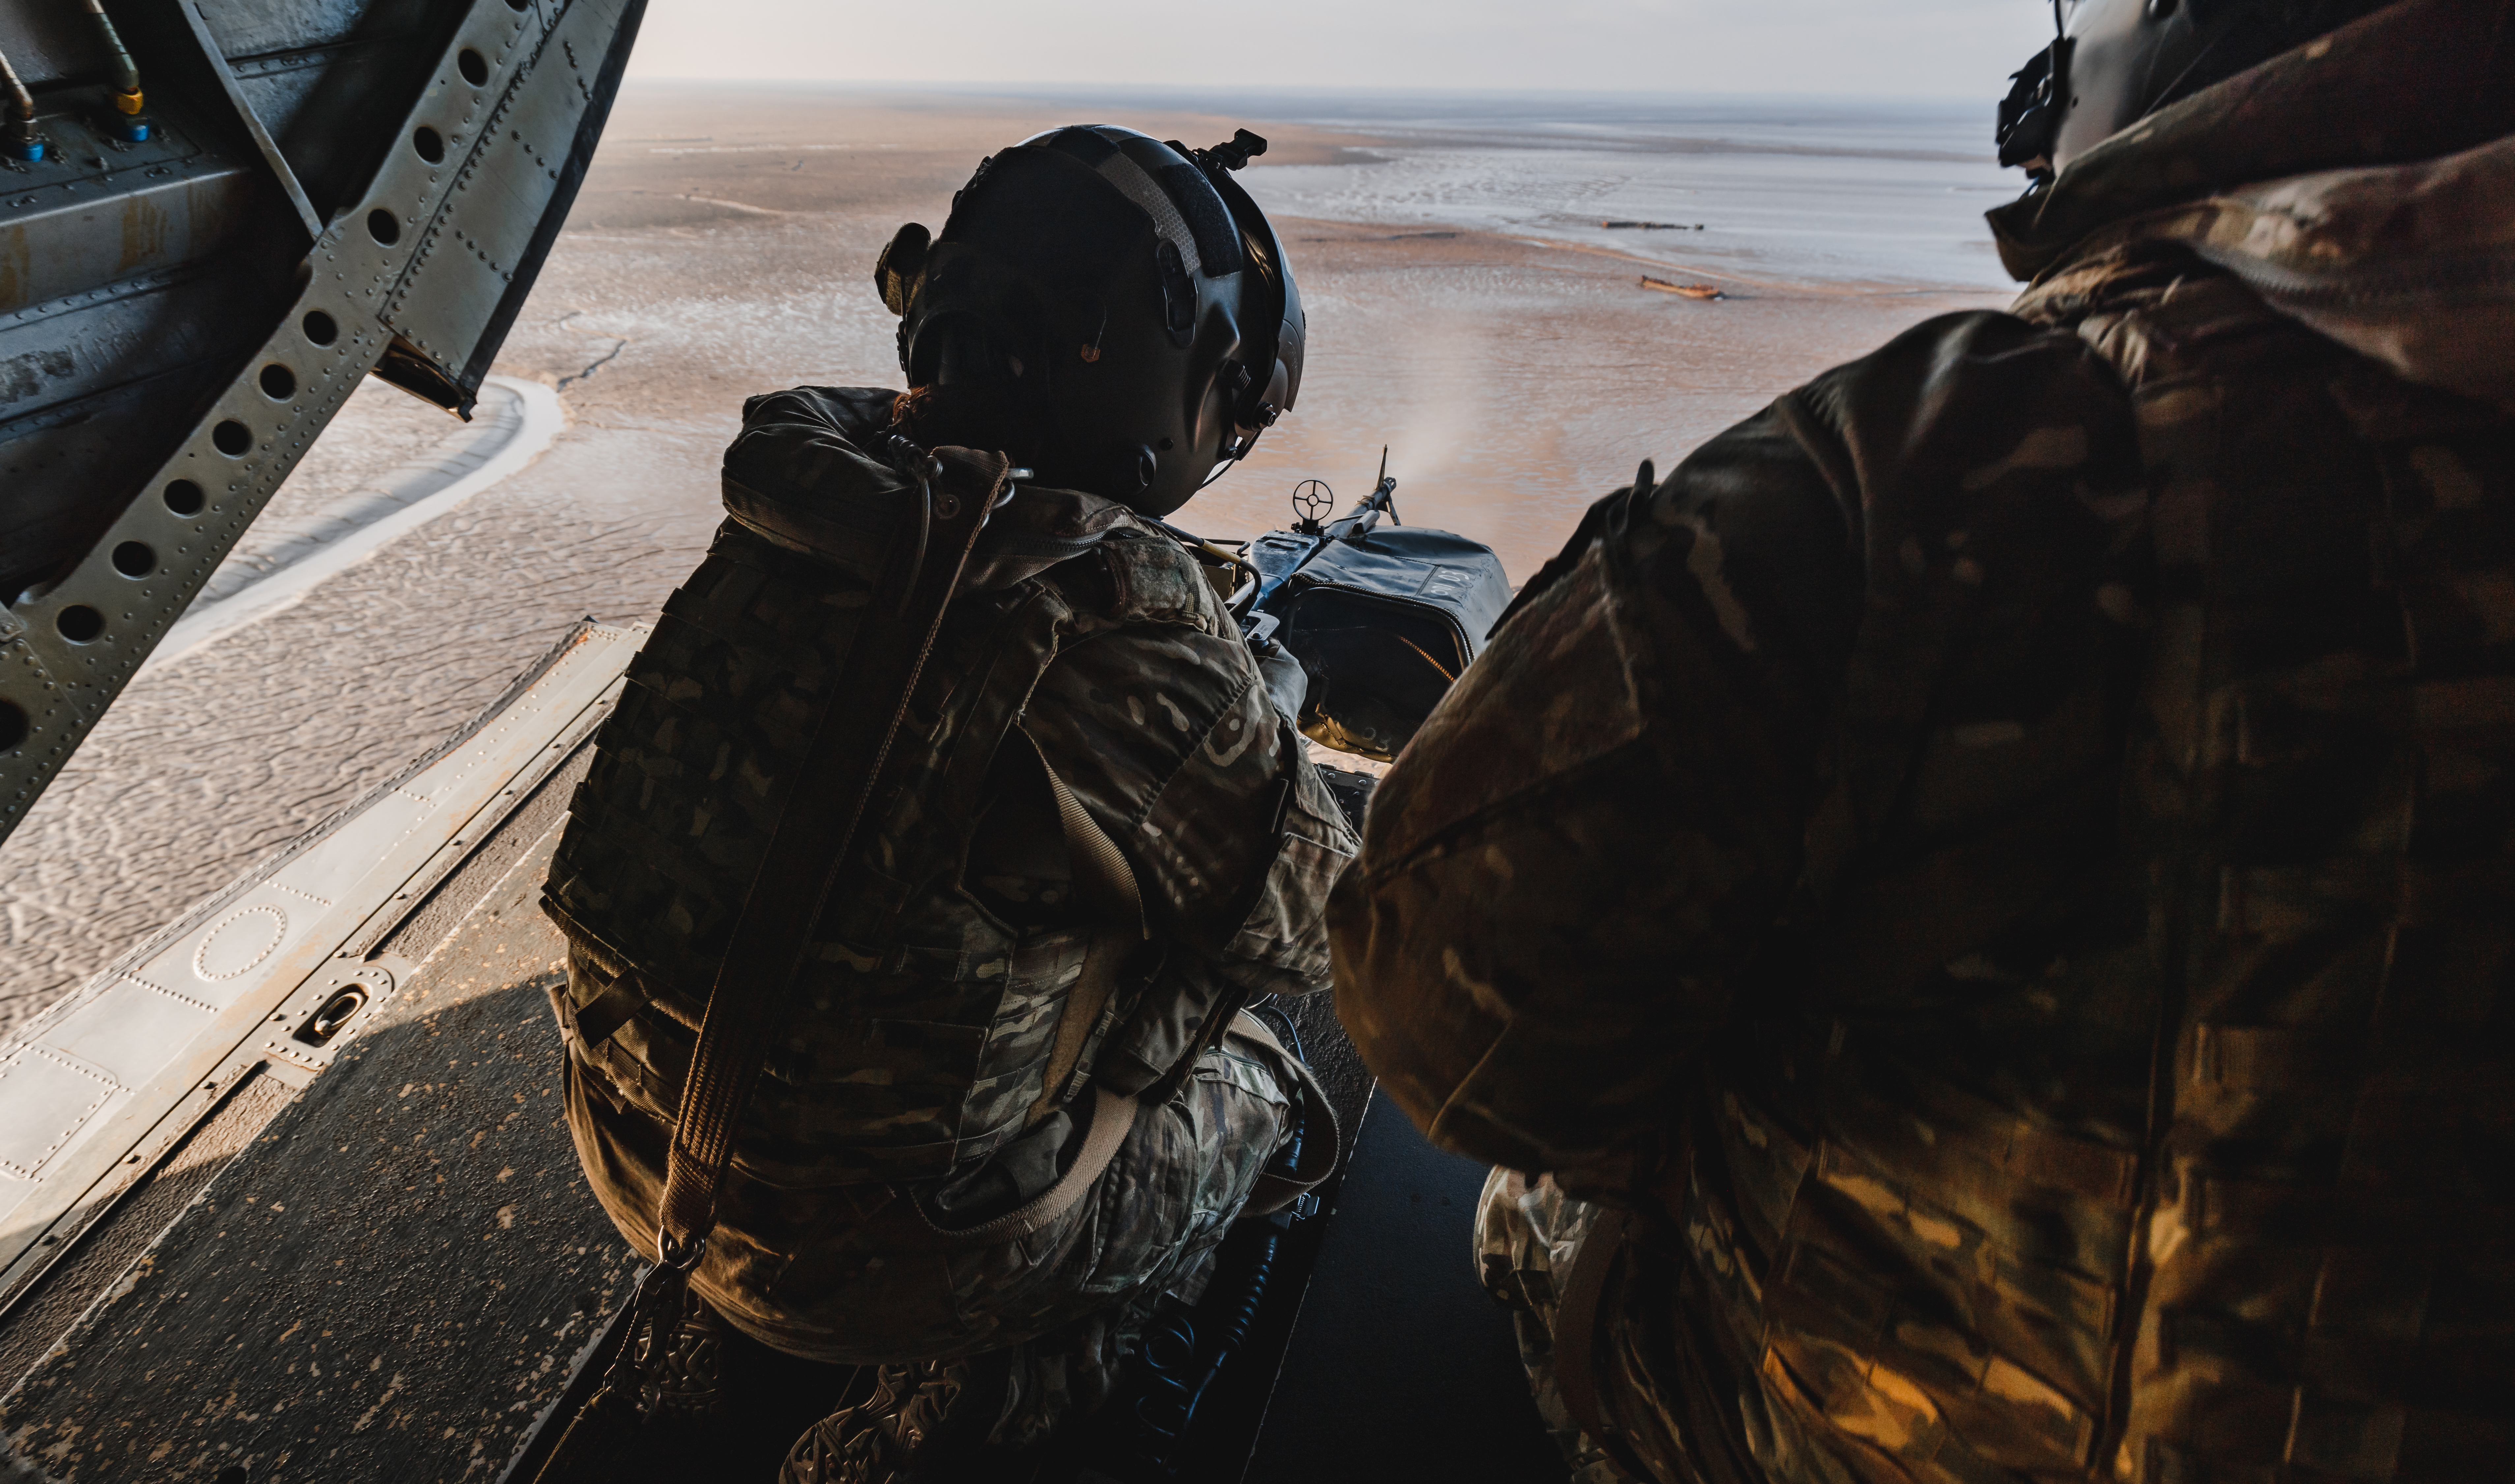 Image shows RAF Gunner manning machine gun from the back of a Chinook while it is in flight.